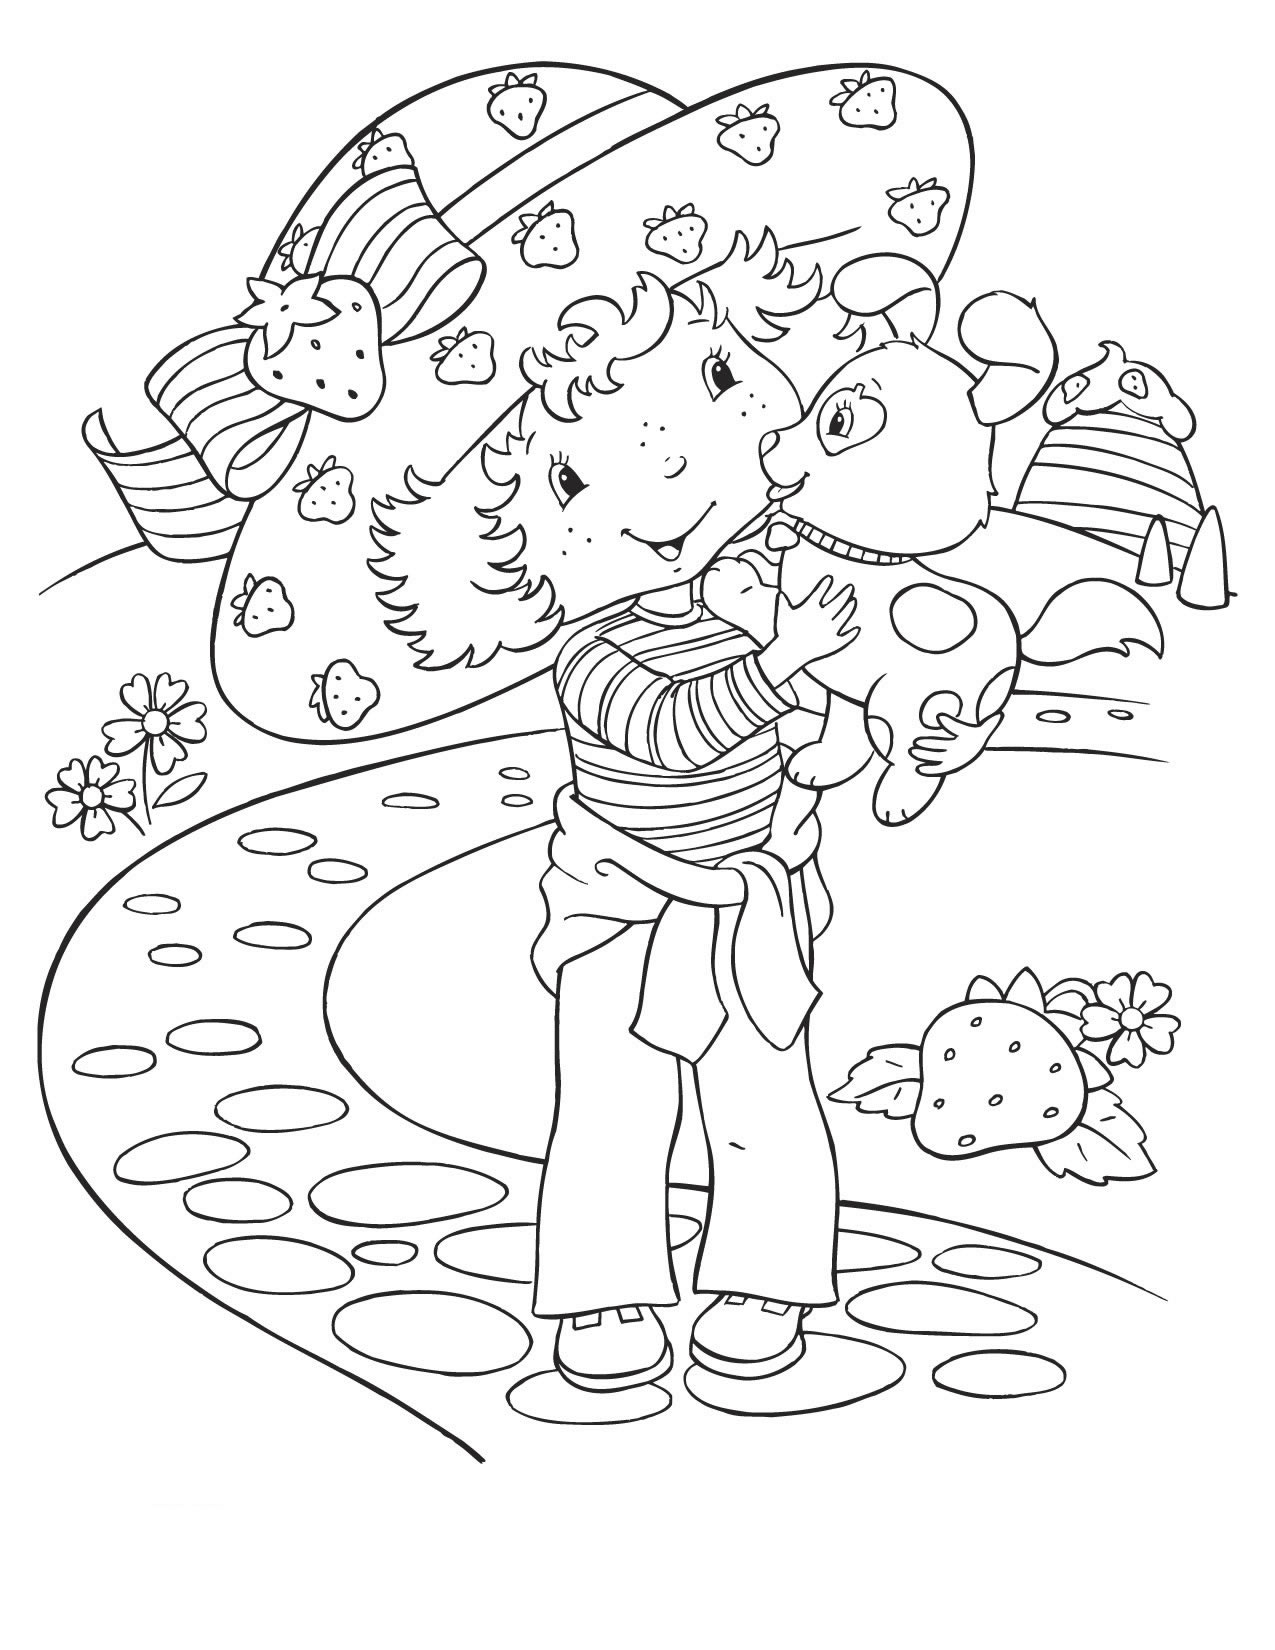 Coloring Pages For Children Strawberry Shortcake 29179 